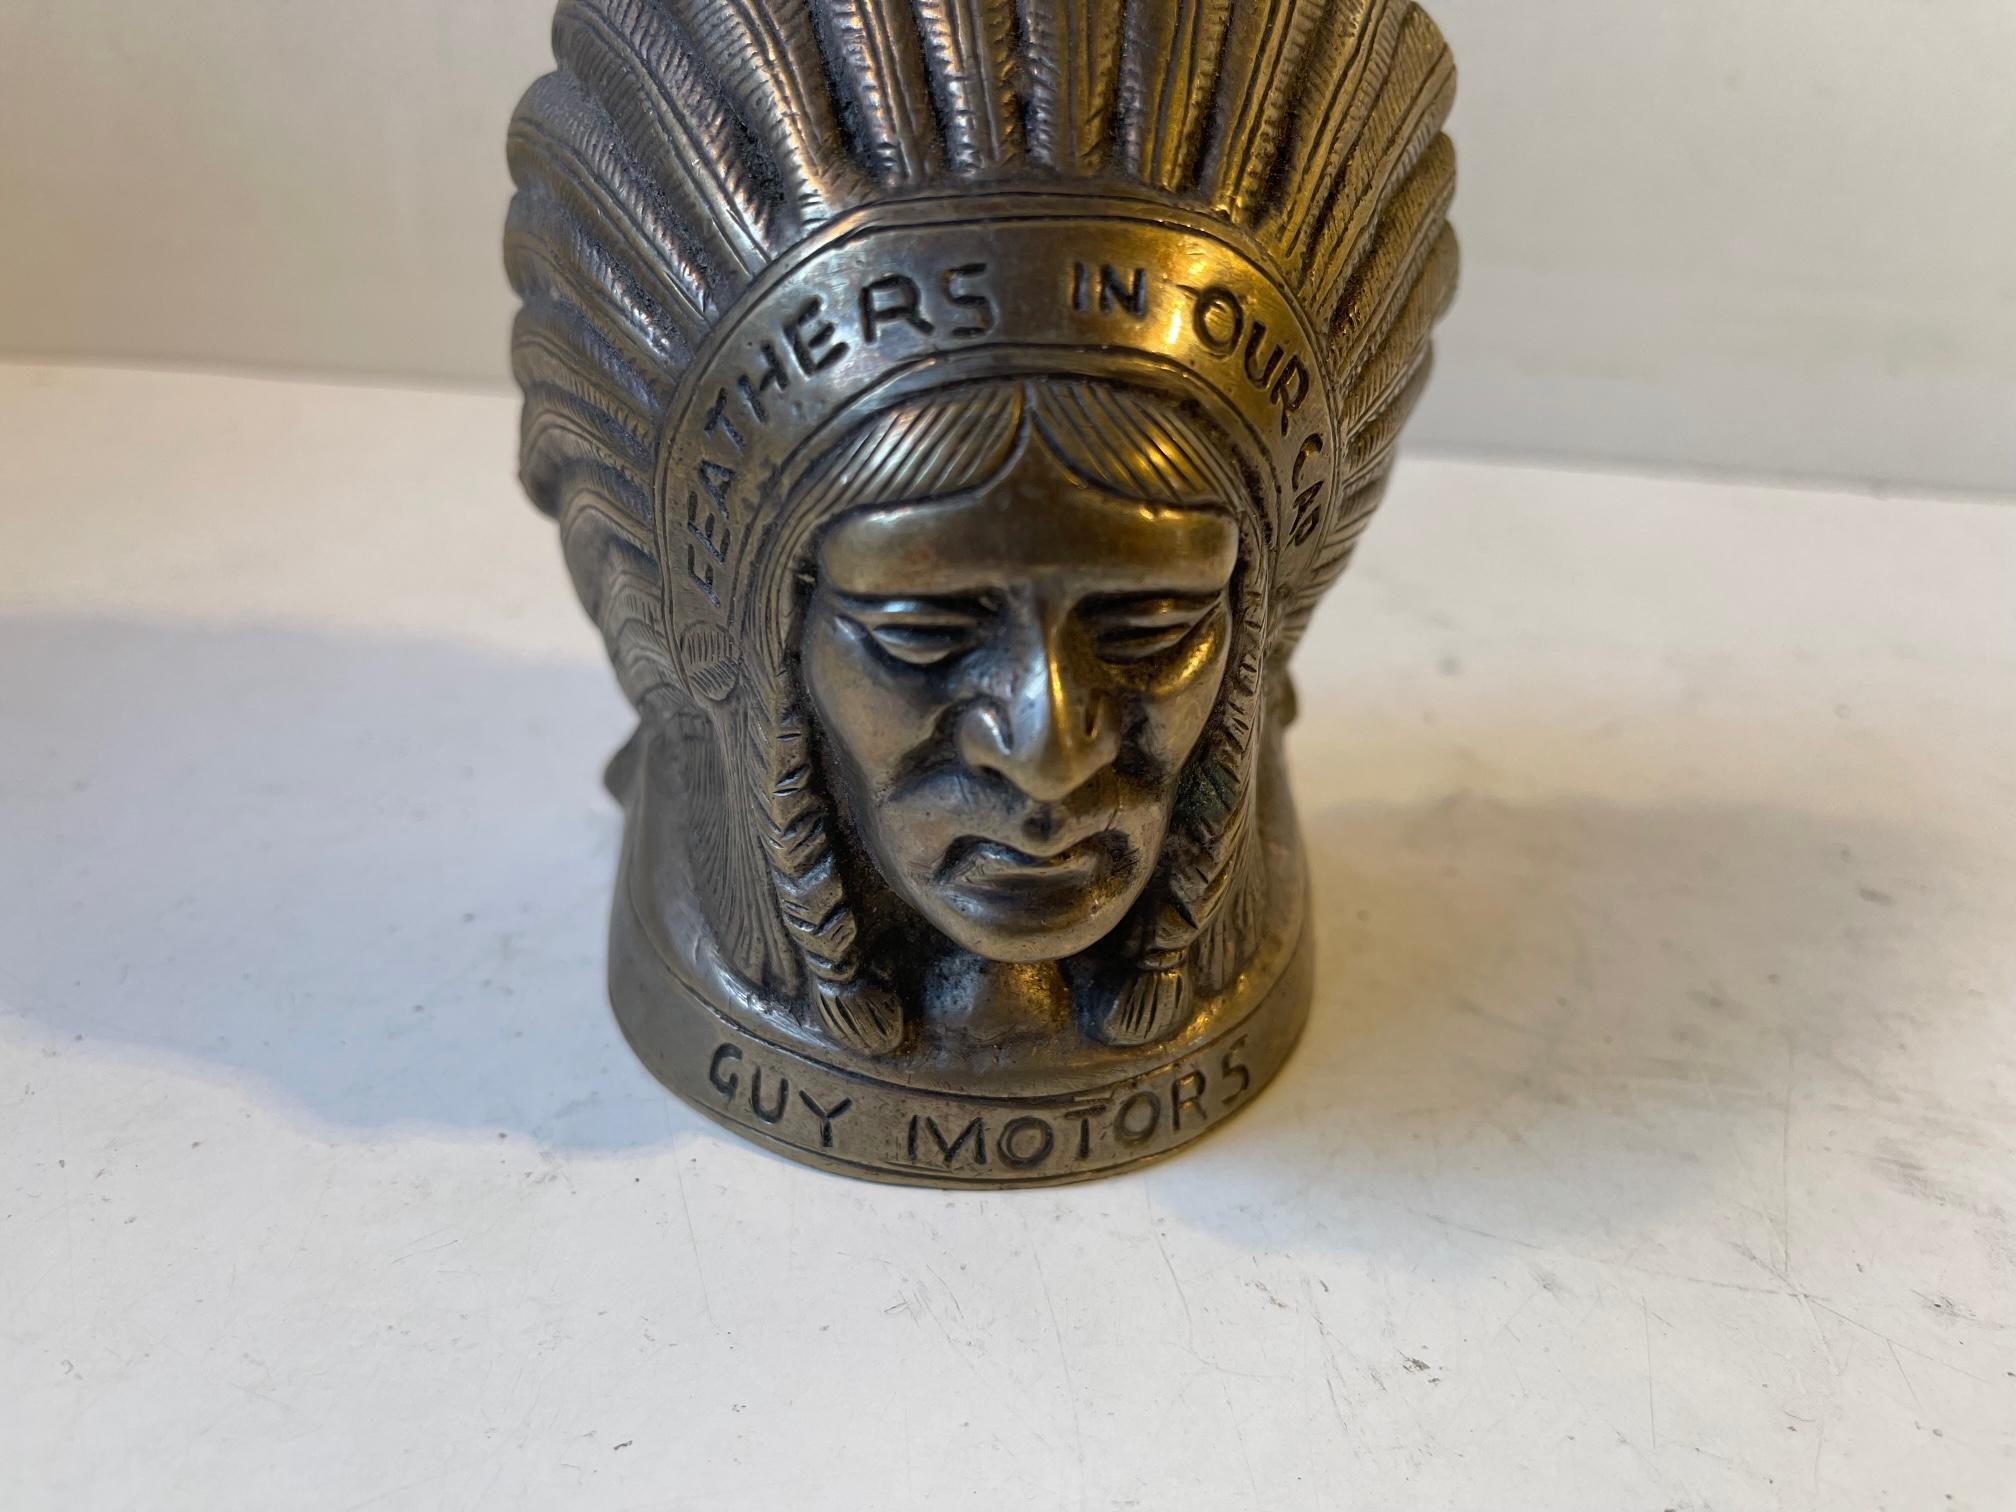 English Indian Chief Hood Ornament by Guy Motors, England, 1920s